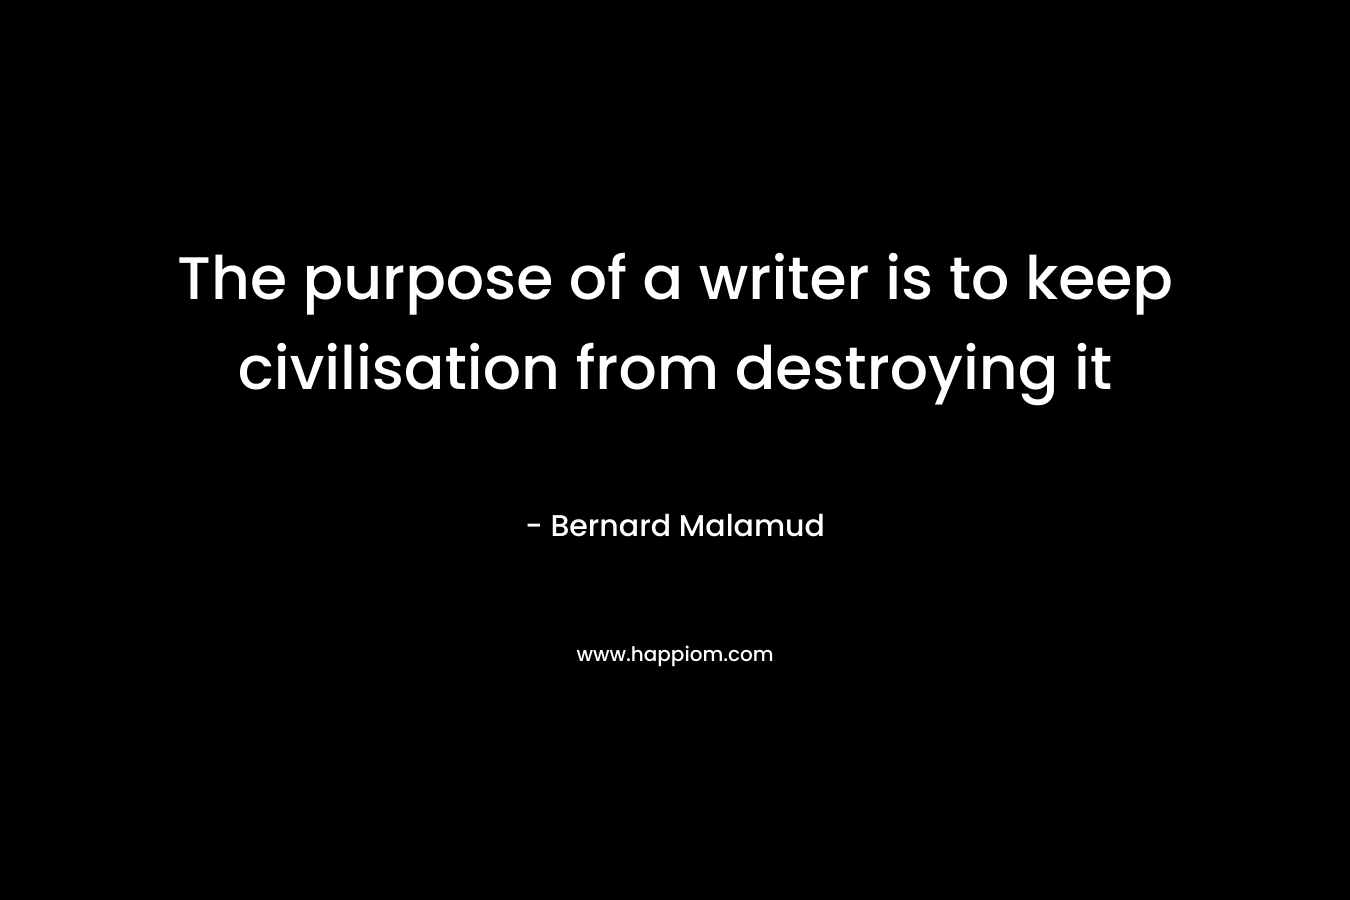 The purpose of a writer is to keep civilisation from destroying it